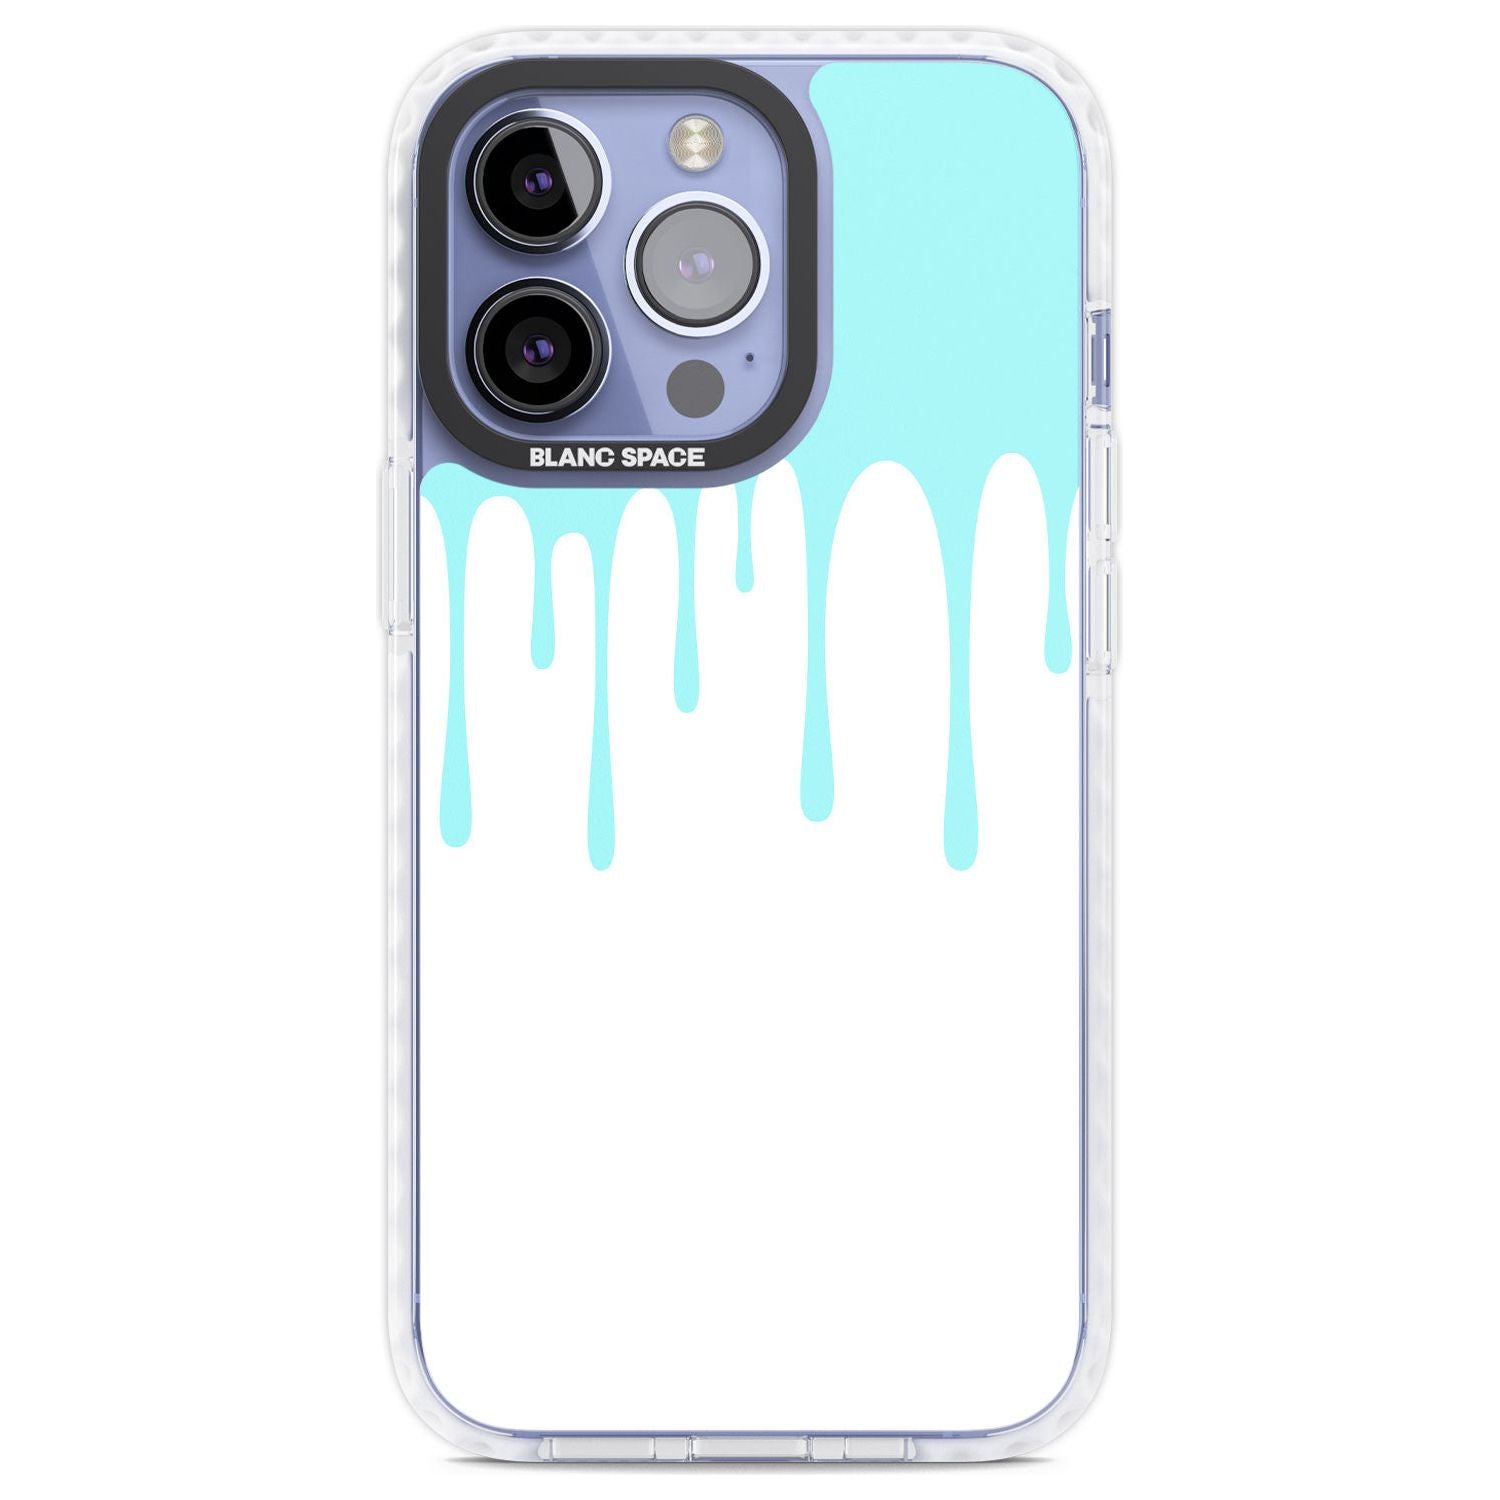 Melted Effect: Teal & White Phone Case iPhone 13 Pro / Impact Case,iPhone 14 Pro / Impact Case,iPhone 15 Pro Max / Impact Case,iPhone 15 Pro / Impact Case Blanc Space